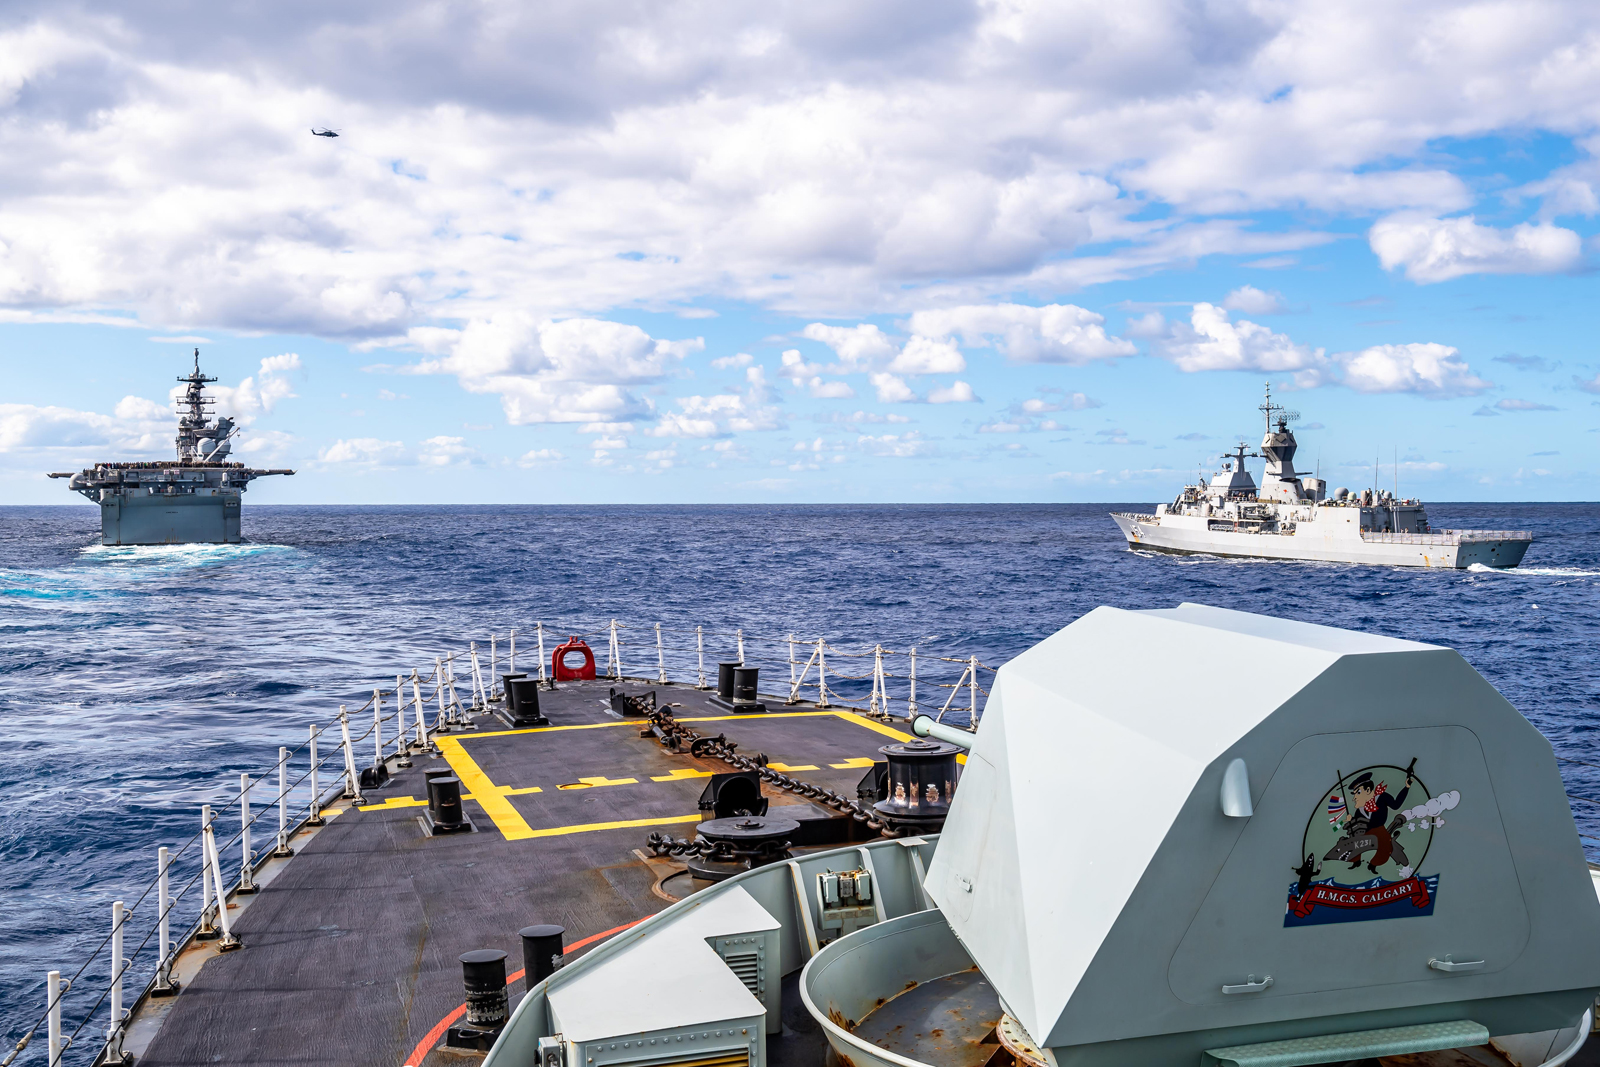 A view from HMCS Calgary of USS America, an amphibious assault ship and the lead of her class from the United States Navy, and HMAS Parramatta, an Anzac-class frigate from the Royal Australian Navy, as the ships maintain their position in formation with other ships in the Coral Sea  on July 22 during OPERATION Projection and Exercise Talisman Sabre 2021. Photos by Corporal Lynette Ai Dang, Canadian Armed Forces Photo